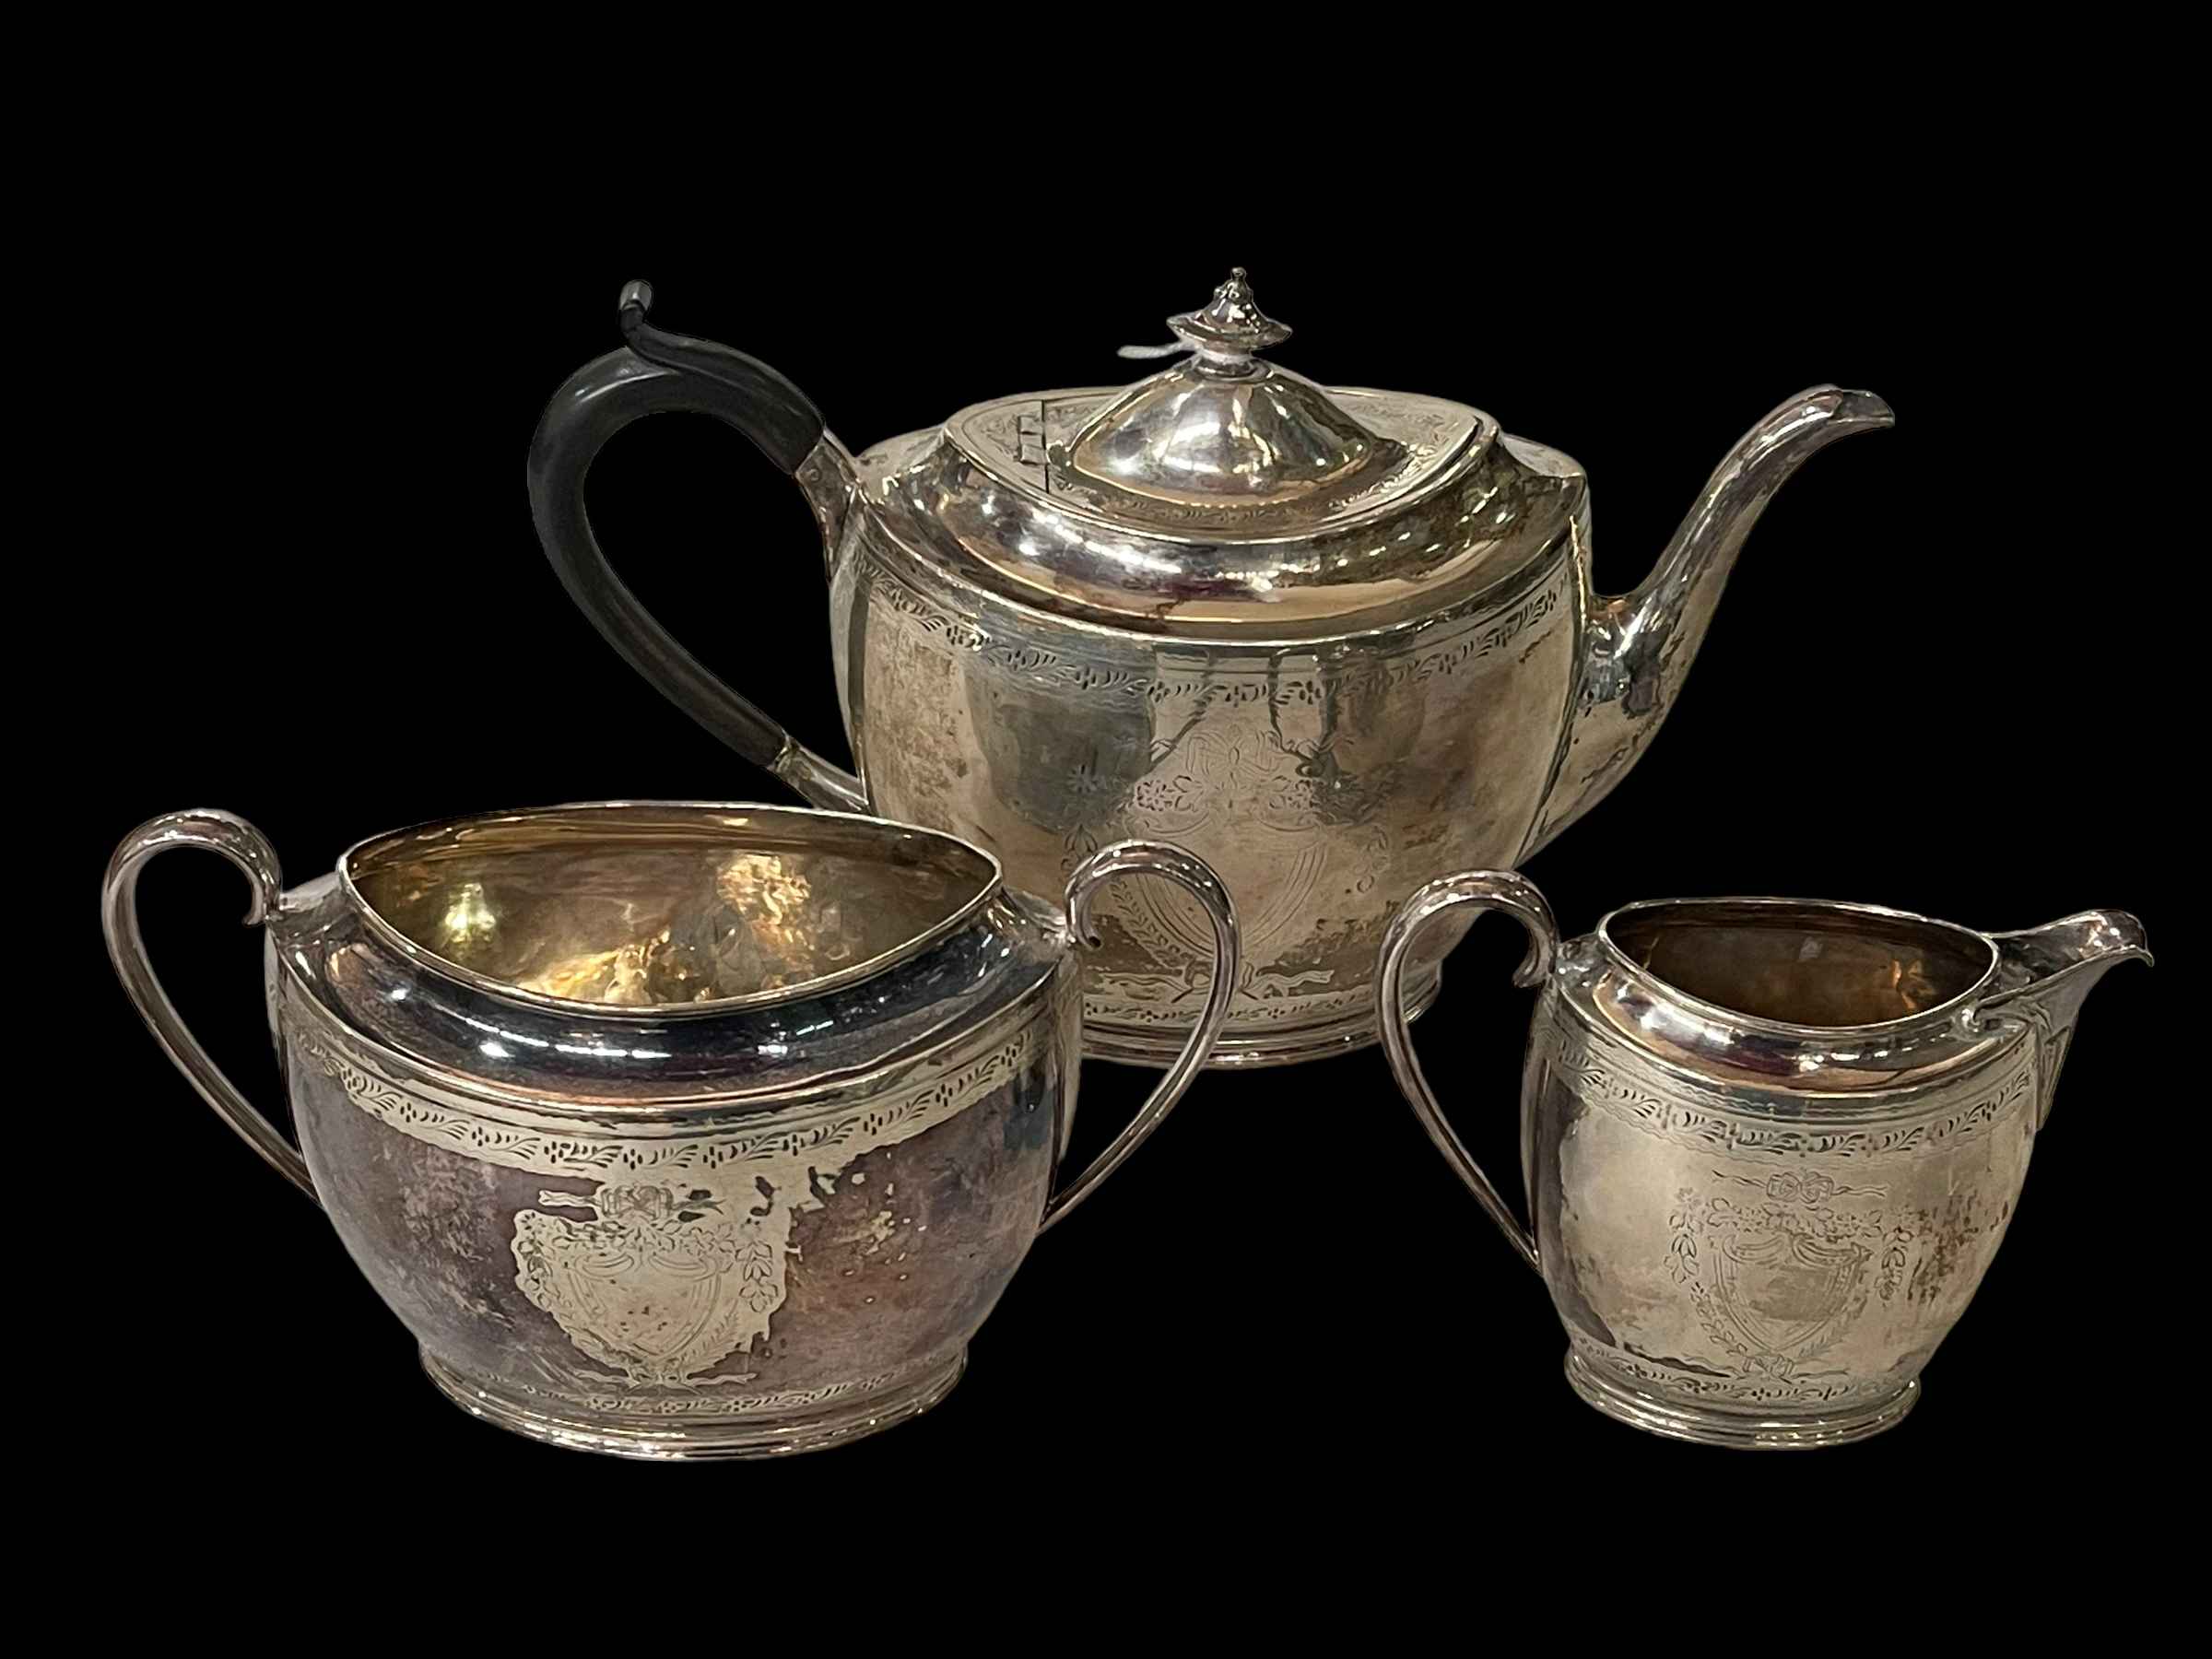 Silver three piece tea set with bright cut and engraved decoration, James Dixon, Sheffield 1892.